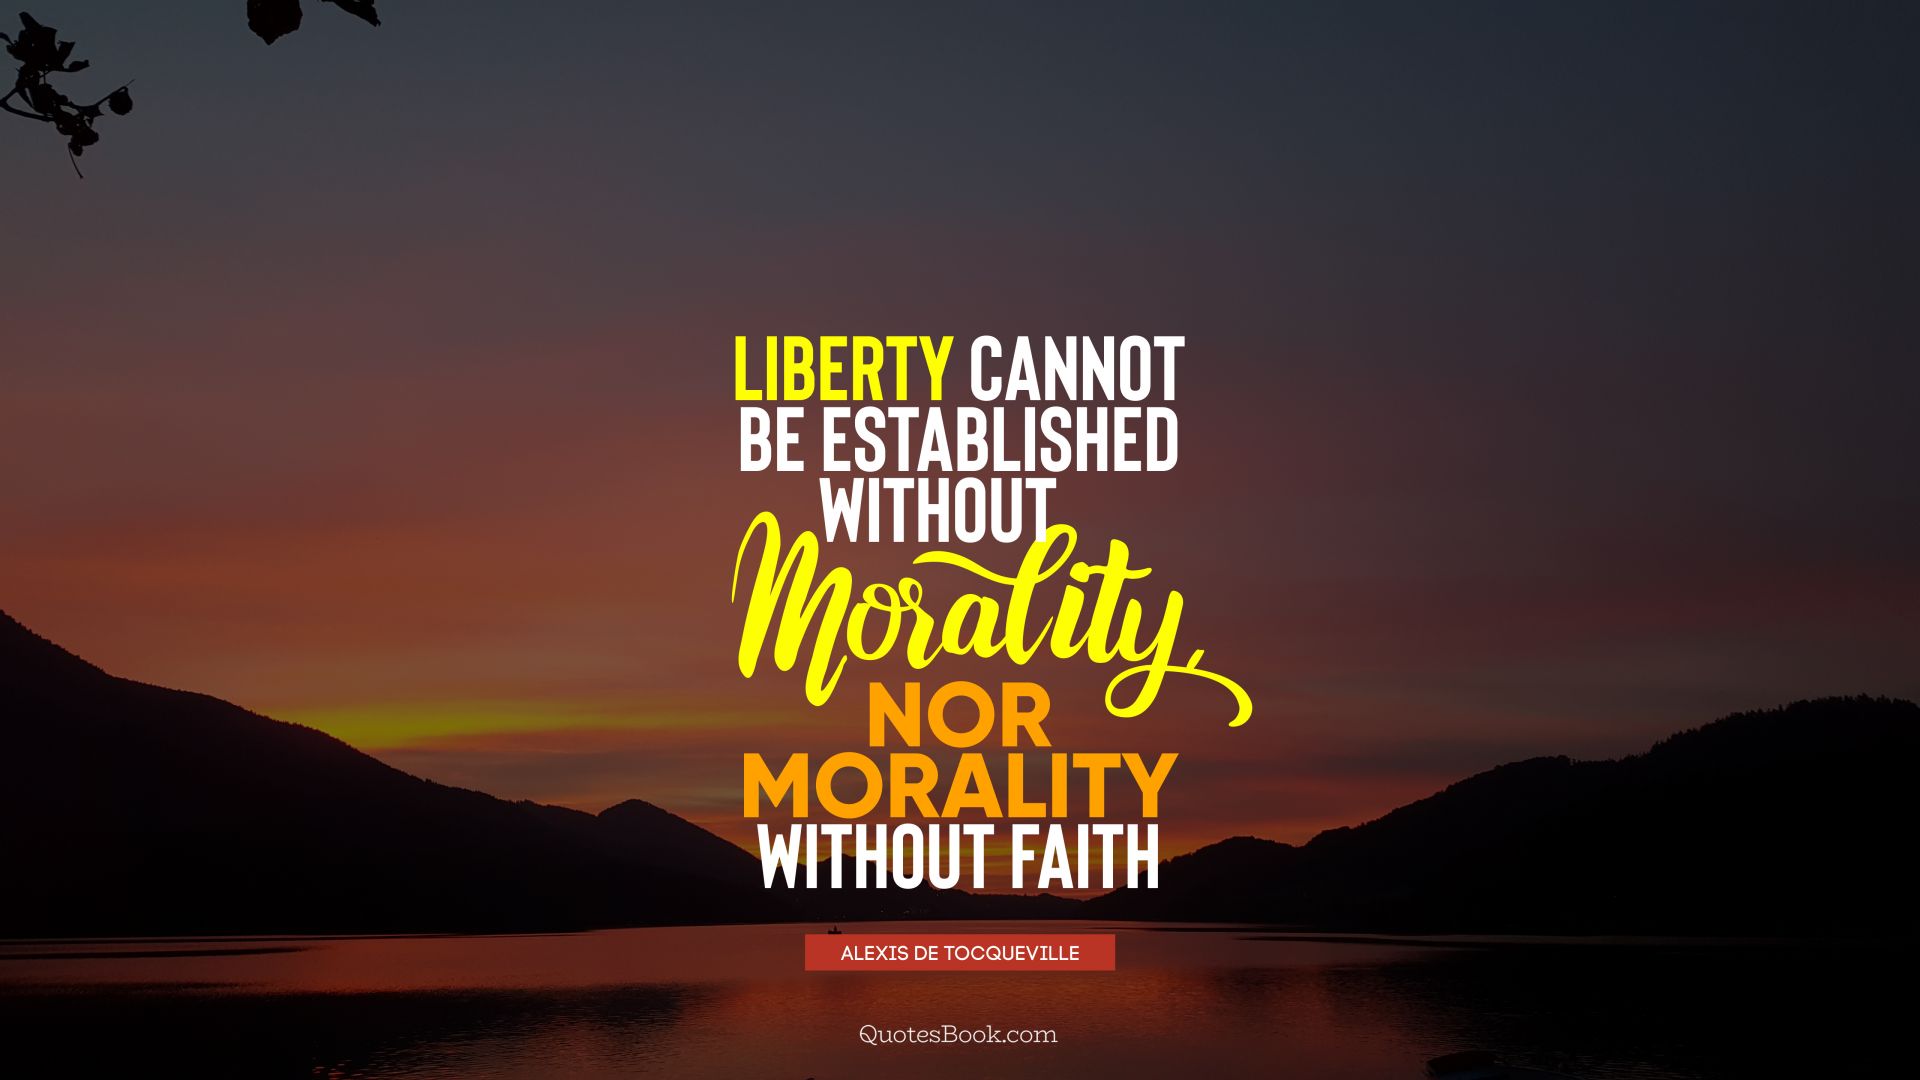 Liberty cannot be established without morality, nor morality without faith. - Quote by Alexis de Tocqueville